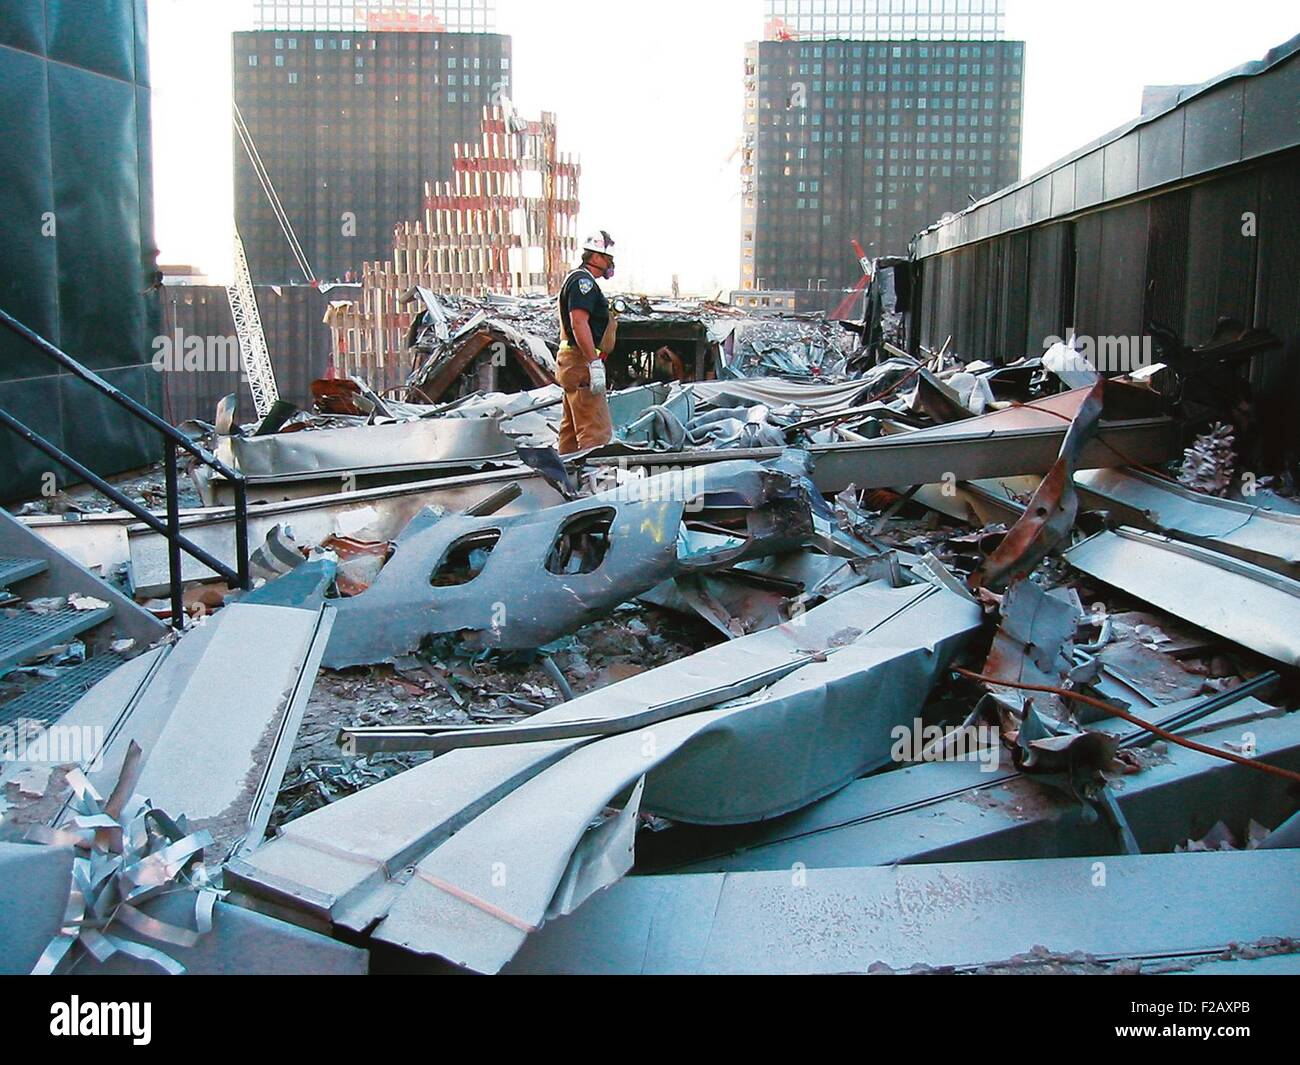 A portion of the fuselage of United Airlines Flight 175 on the roof of WTC 5, Oct. 25, 2001. This was from the plane that crashed into the South Tower, WTC 2. World Trade Center, New York City, after September 11, 2001 terrorist attacks. (BSLOC_2015_2_120) Stock Photo